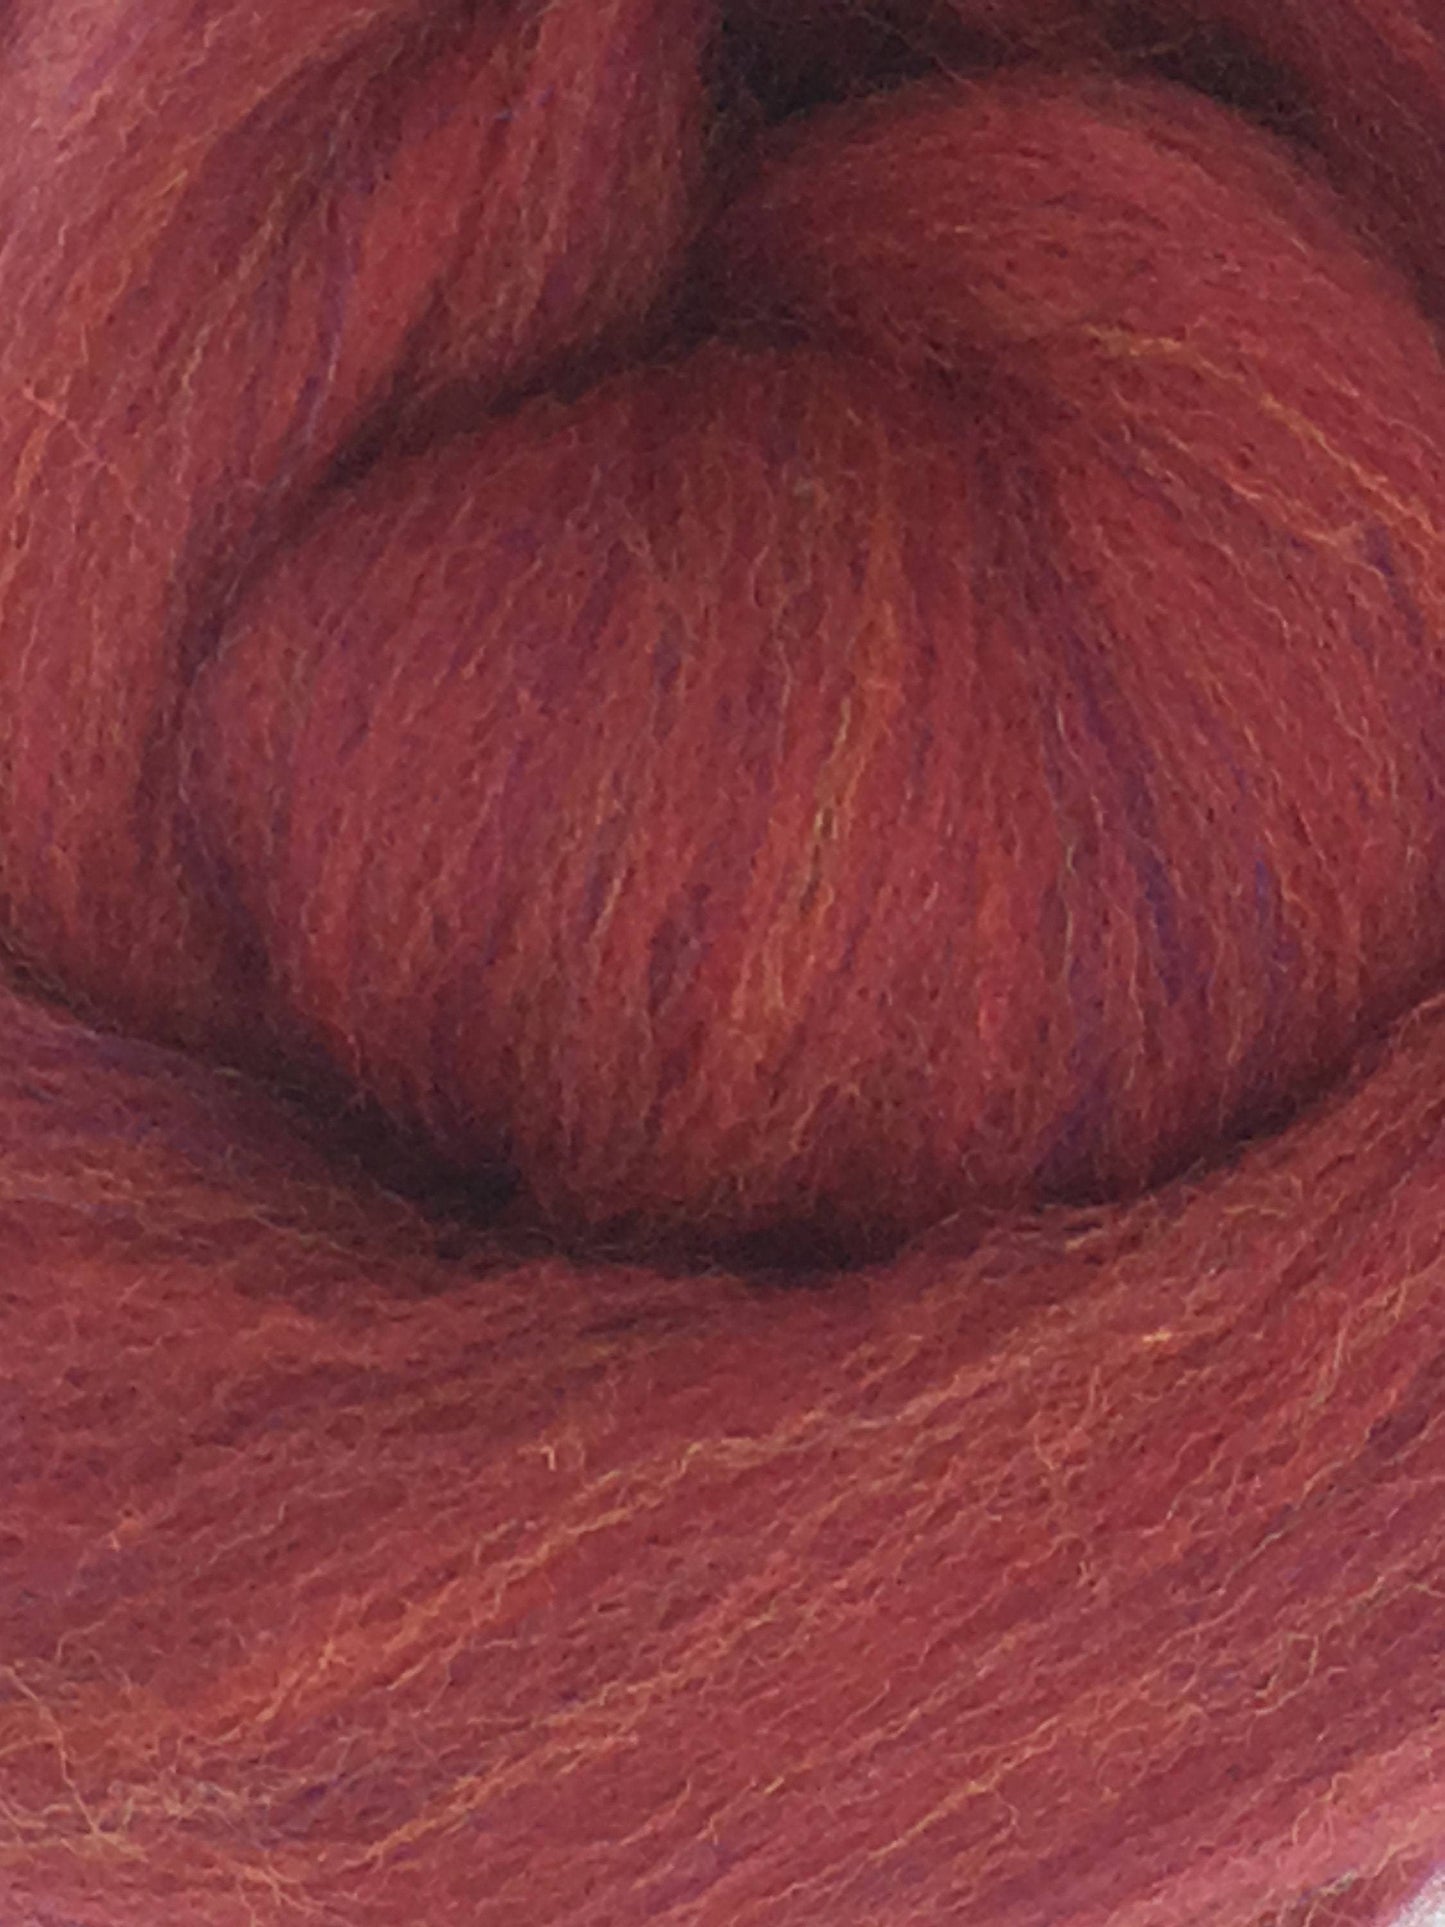 Persian Red Merino  Wool Top Roving - Spin into Yarn, Needle Felt wet felt, weave, knit, all Crafts